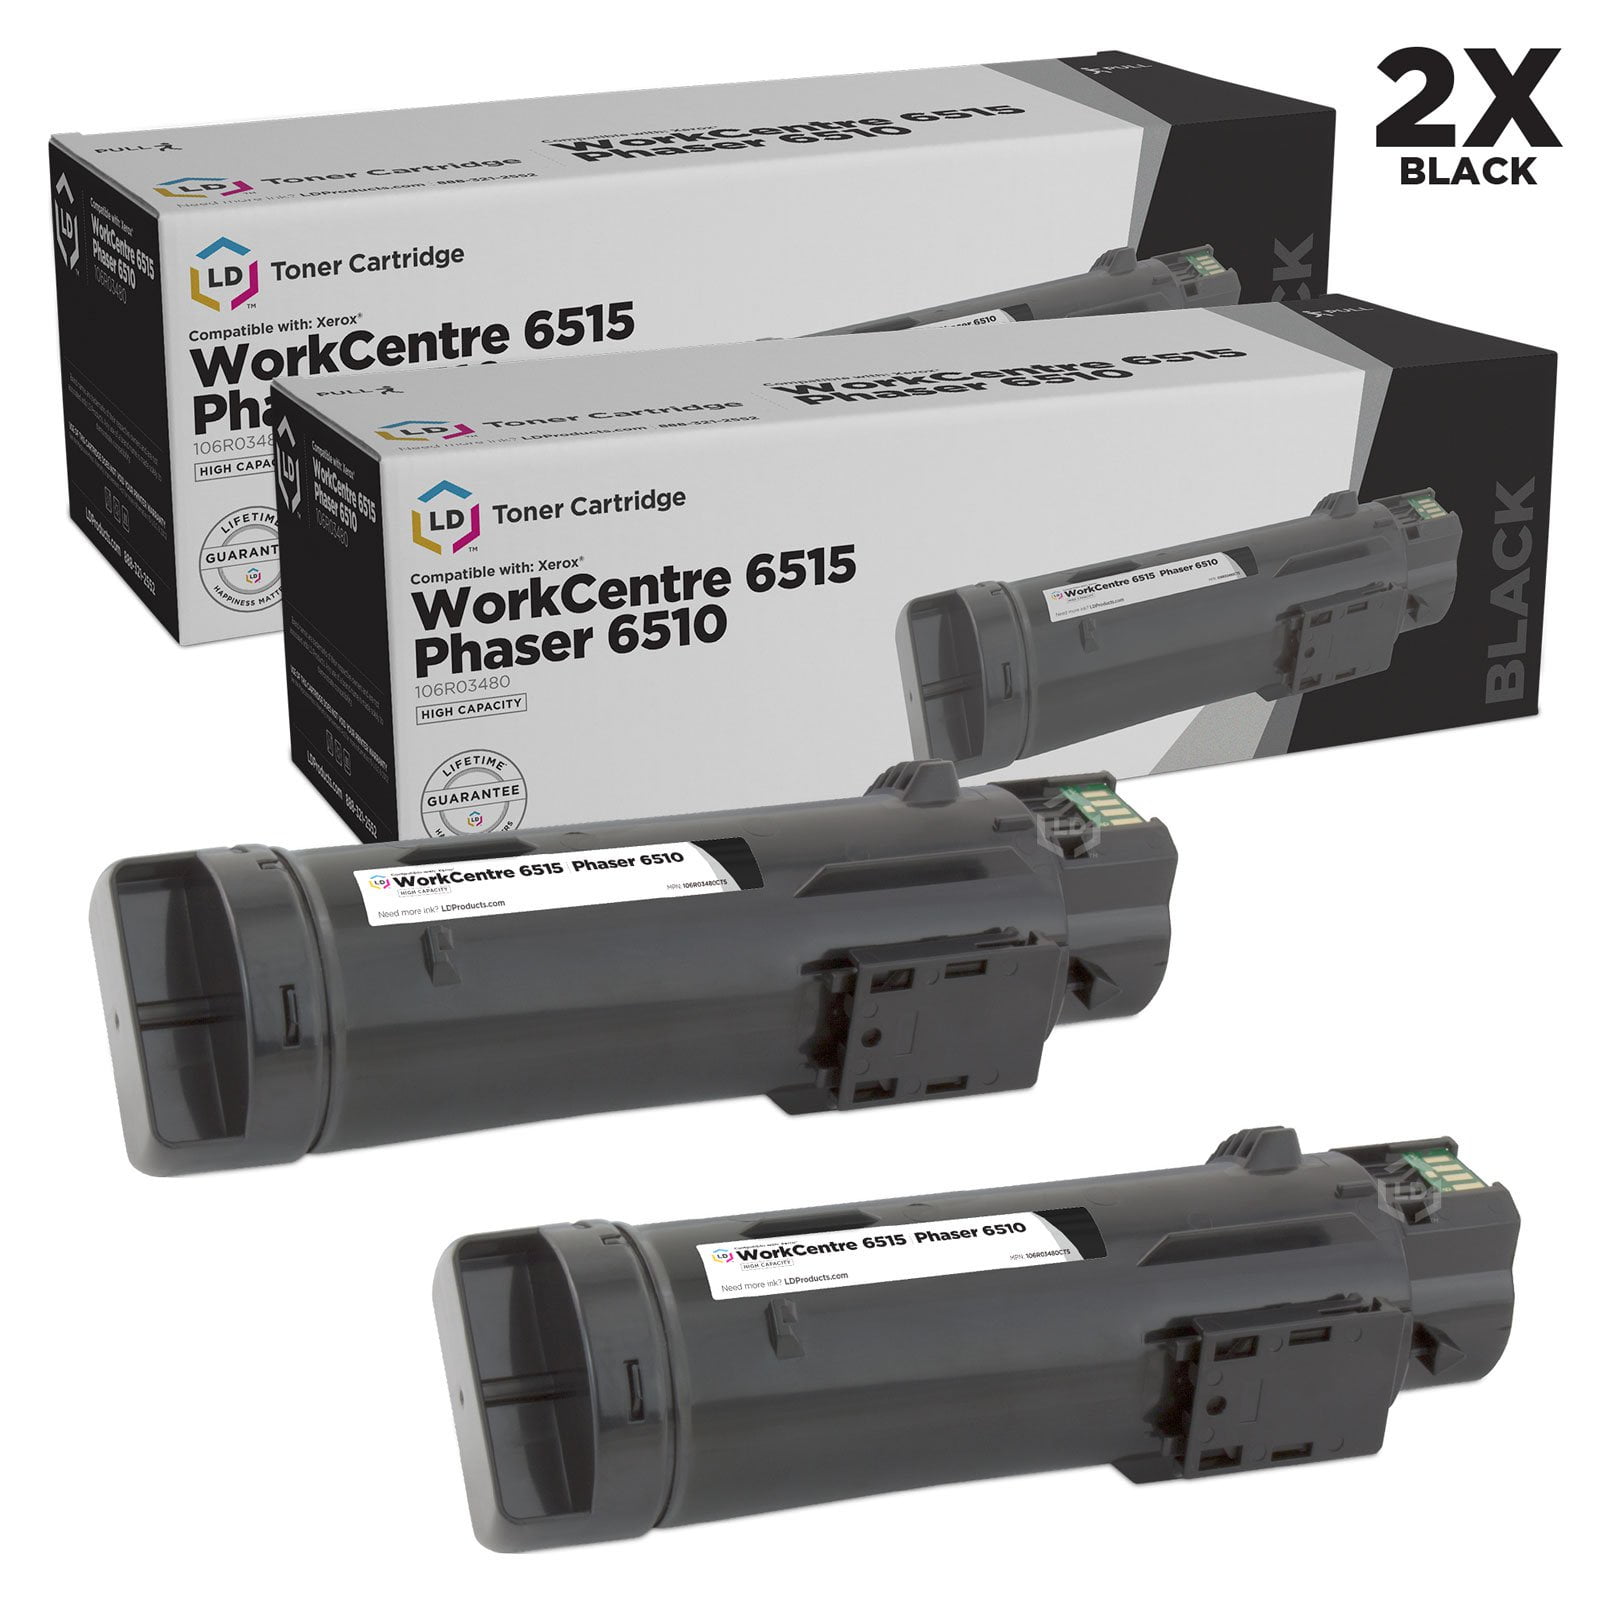 LD Compatible Xerox 106R03480 Black Toner 4PK for Phaser 6515 & WorkCentre 6515 